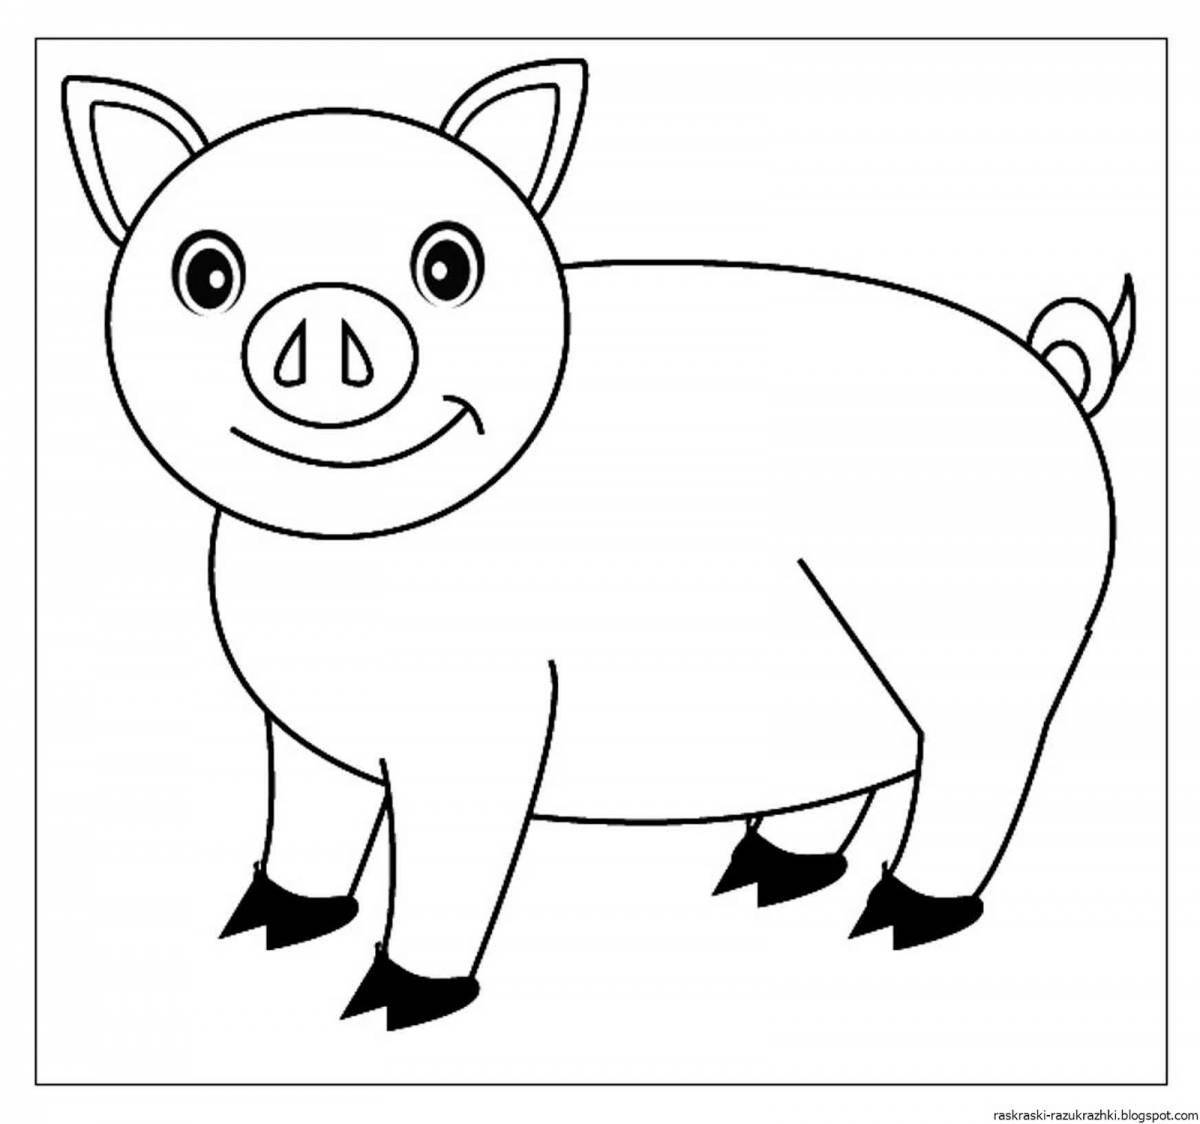 Coloring pig for children